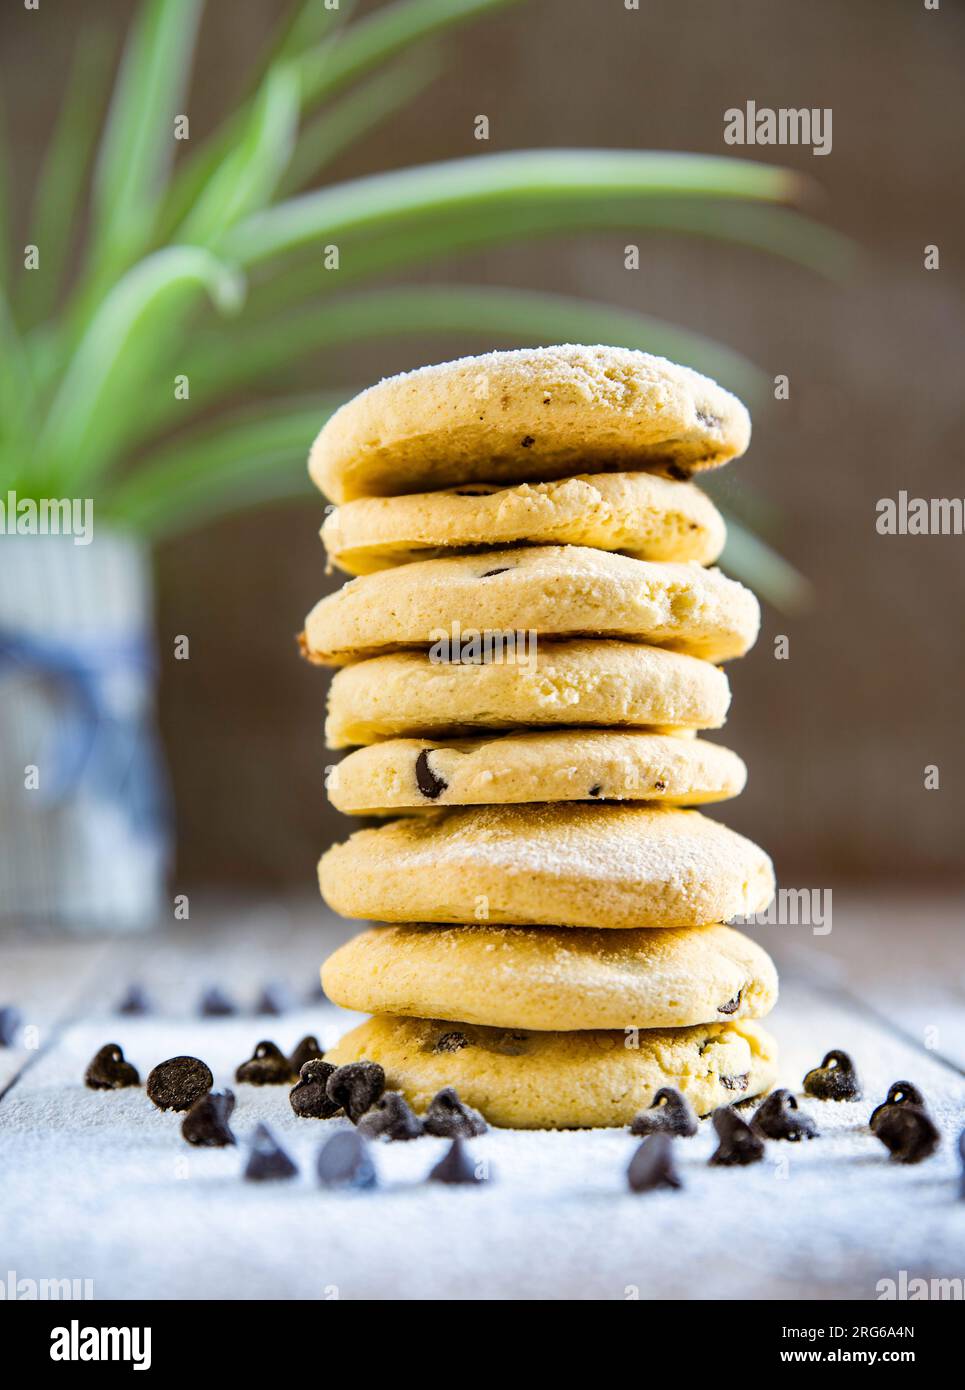 A stack of gluten free biscuits with choc chips Stock Photo